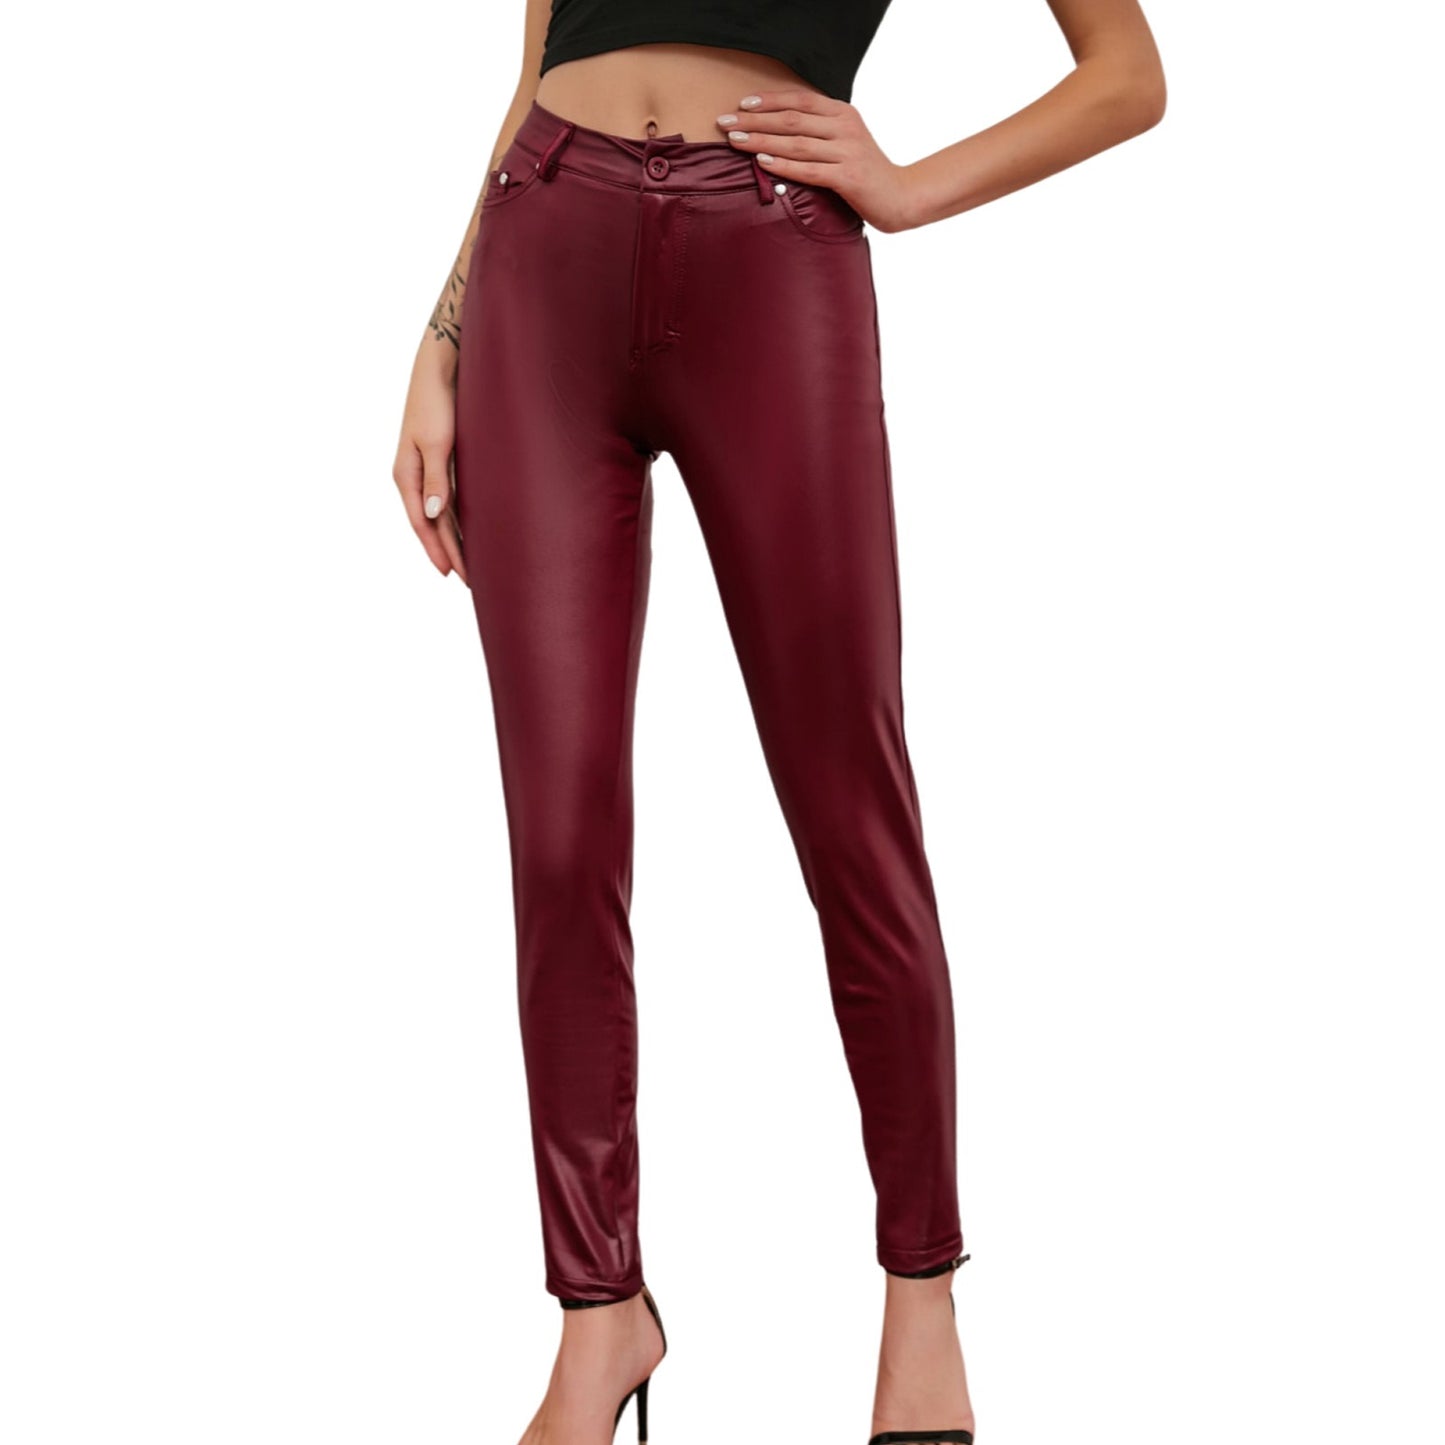 Leather Leaggings - Pants